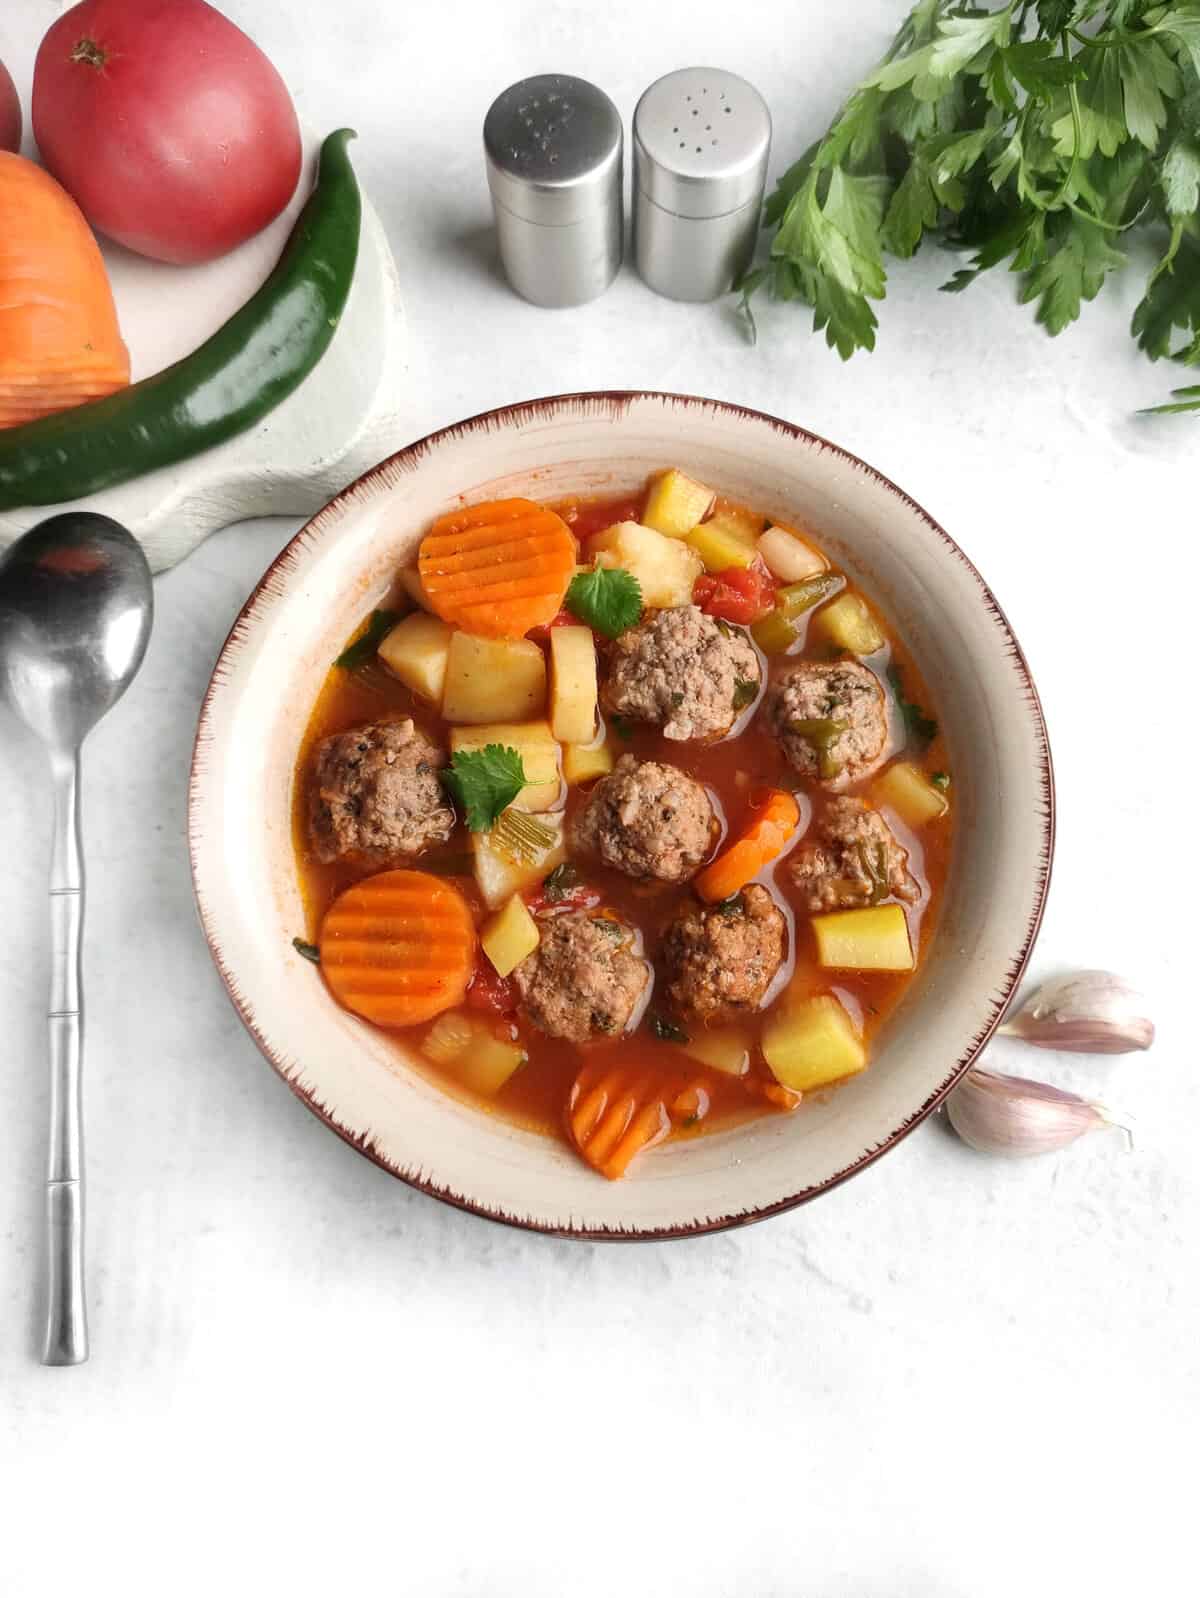 Easy Albondigas Soup (Mexican meatball soup) in a bowl with veggies and meatballs